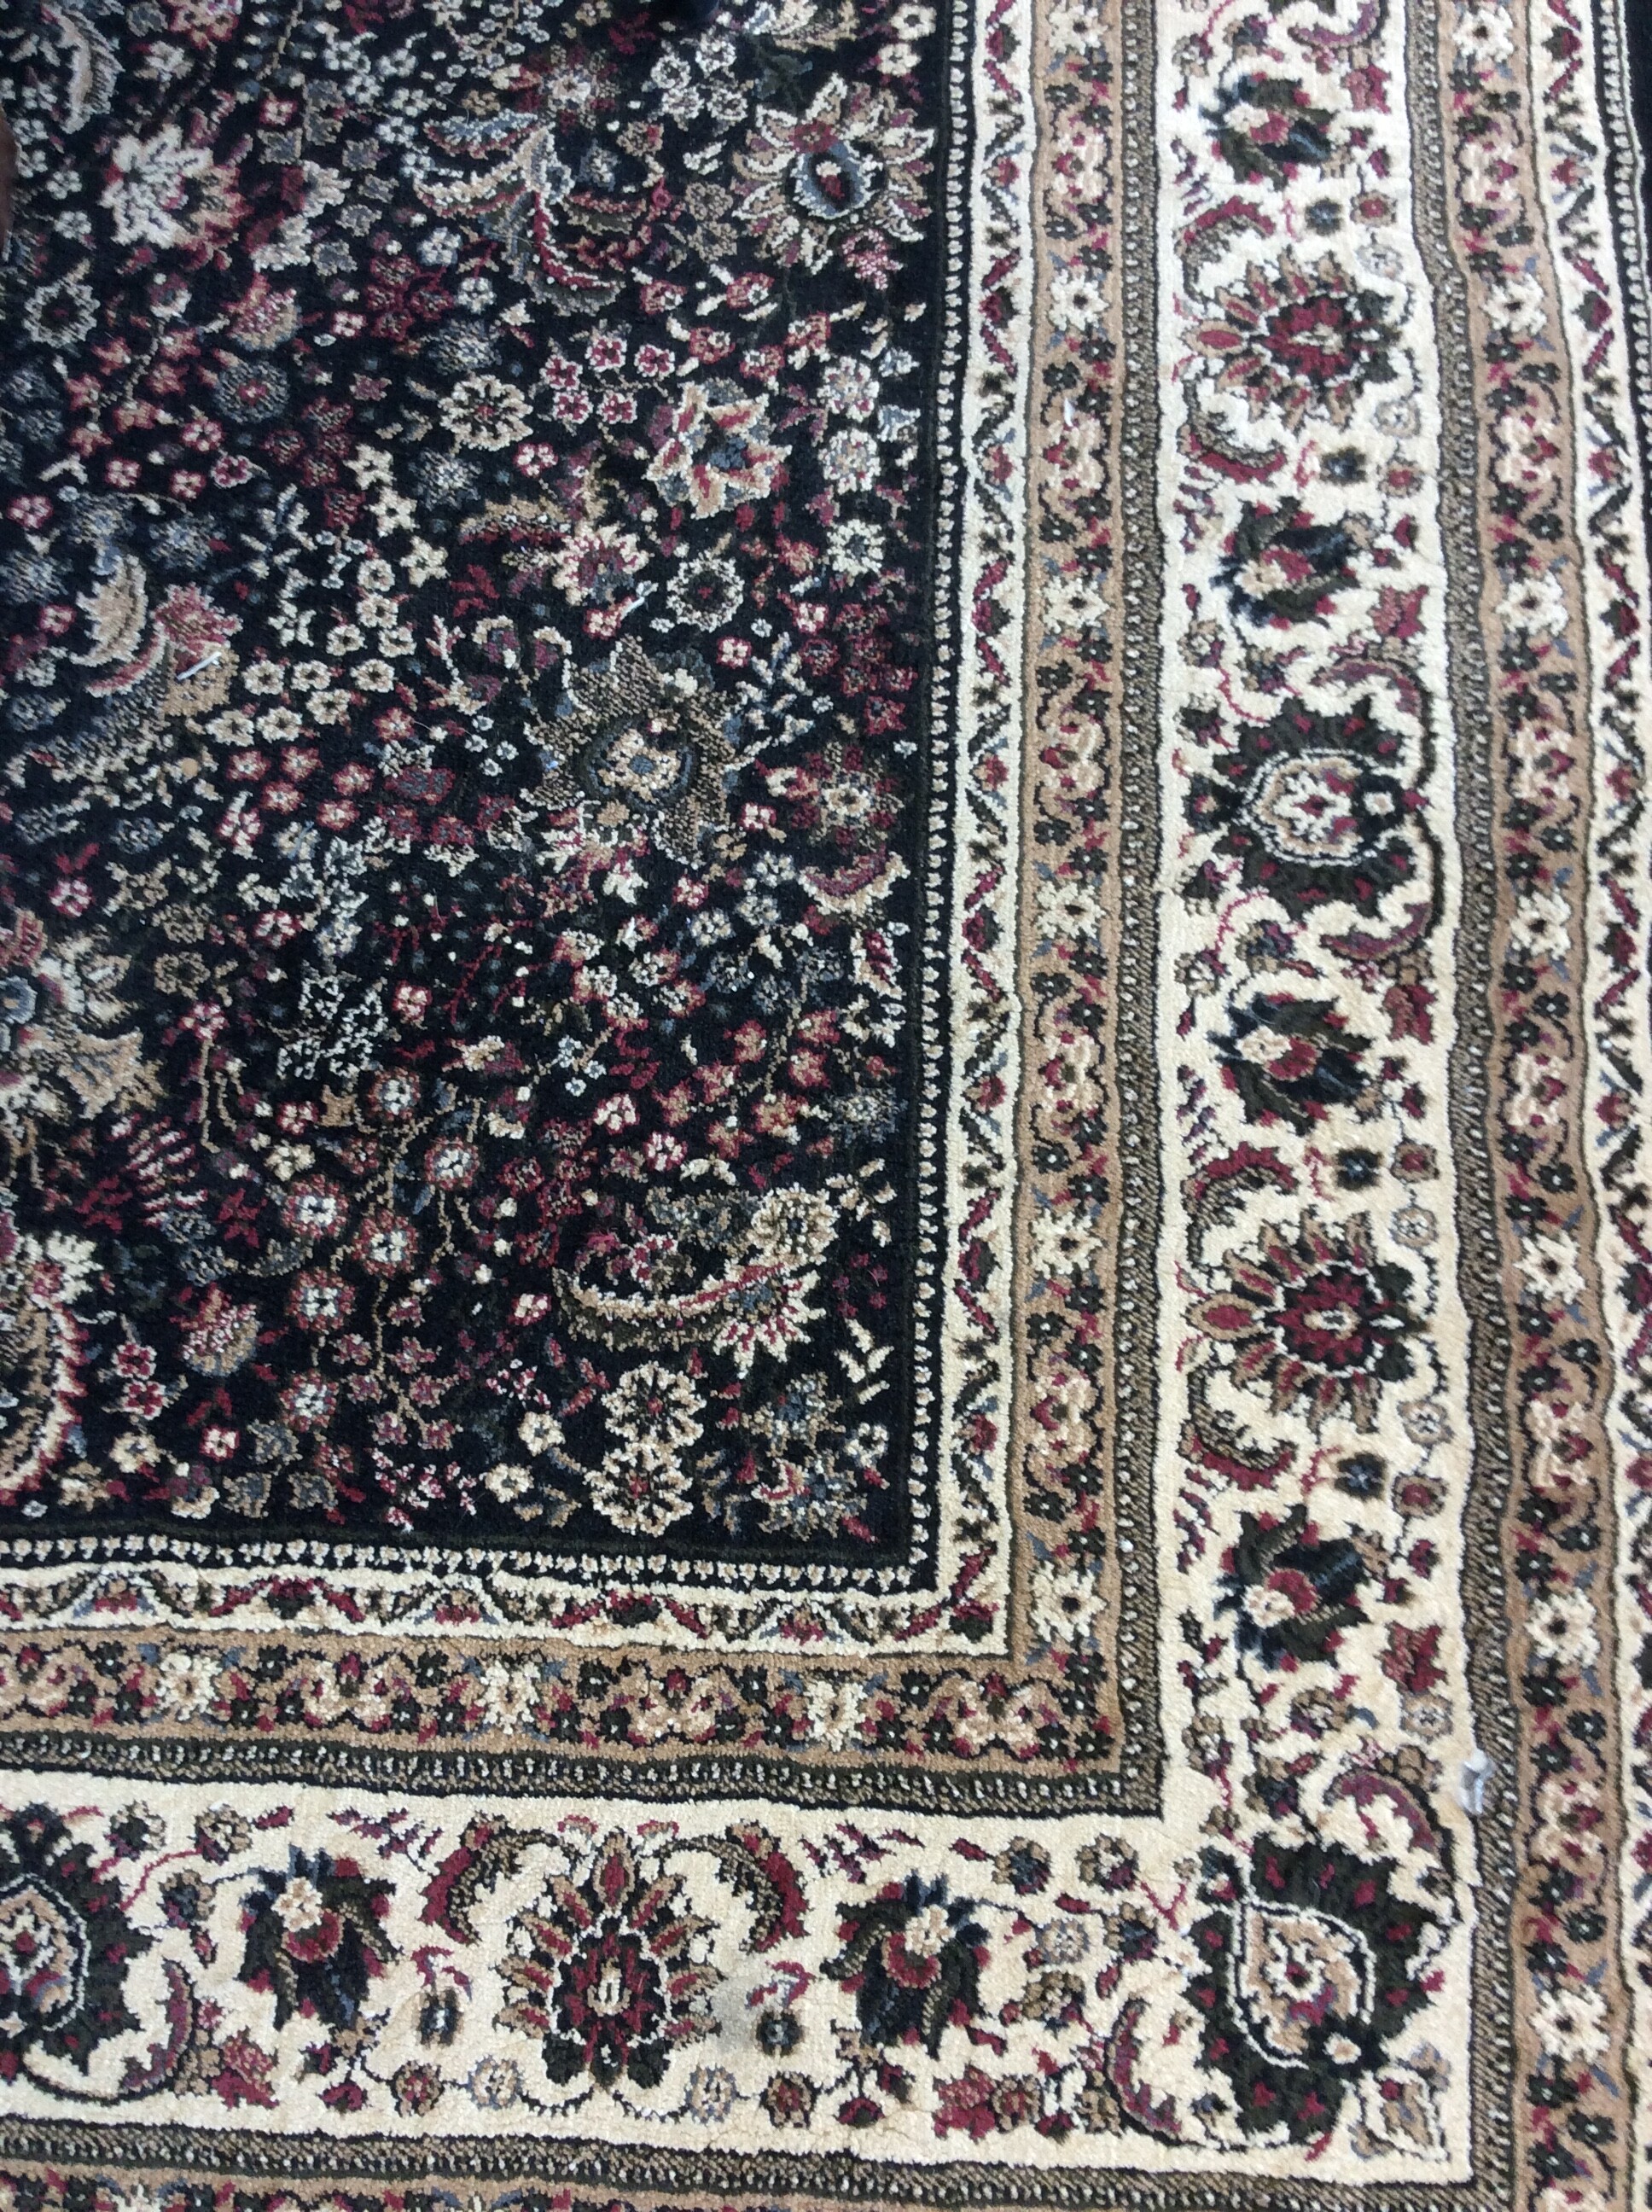 Oriental Weavers Area Rug. This rug is black and cream colored with a beautiful colorful pattern.